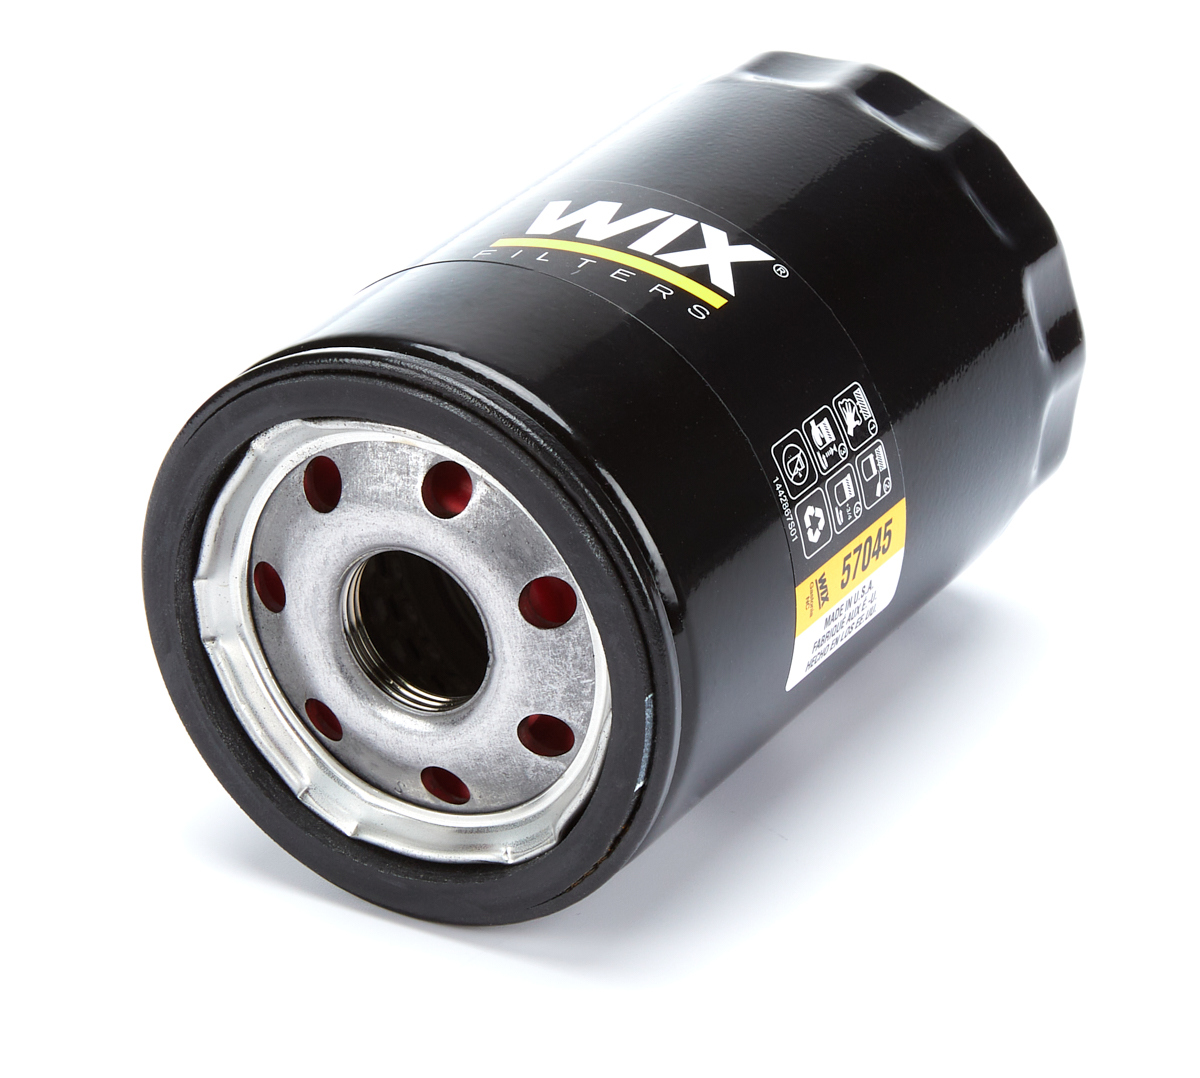 Wix Filters 57045 Oil Filter, Canister, Screw-On, 4.828 in Tall, 22 x 1.5 mm Thread, Steel, Black, Various Applications, Each